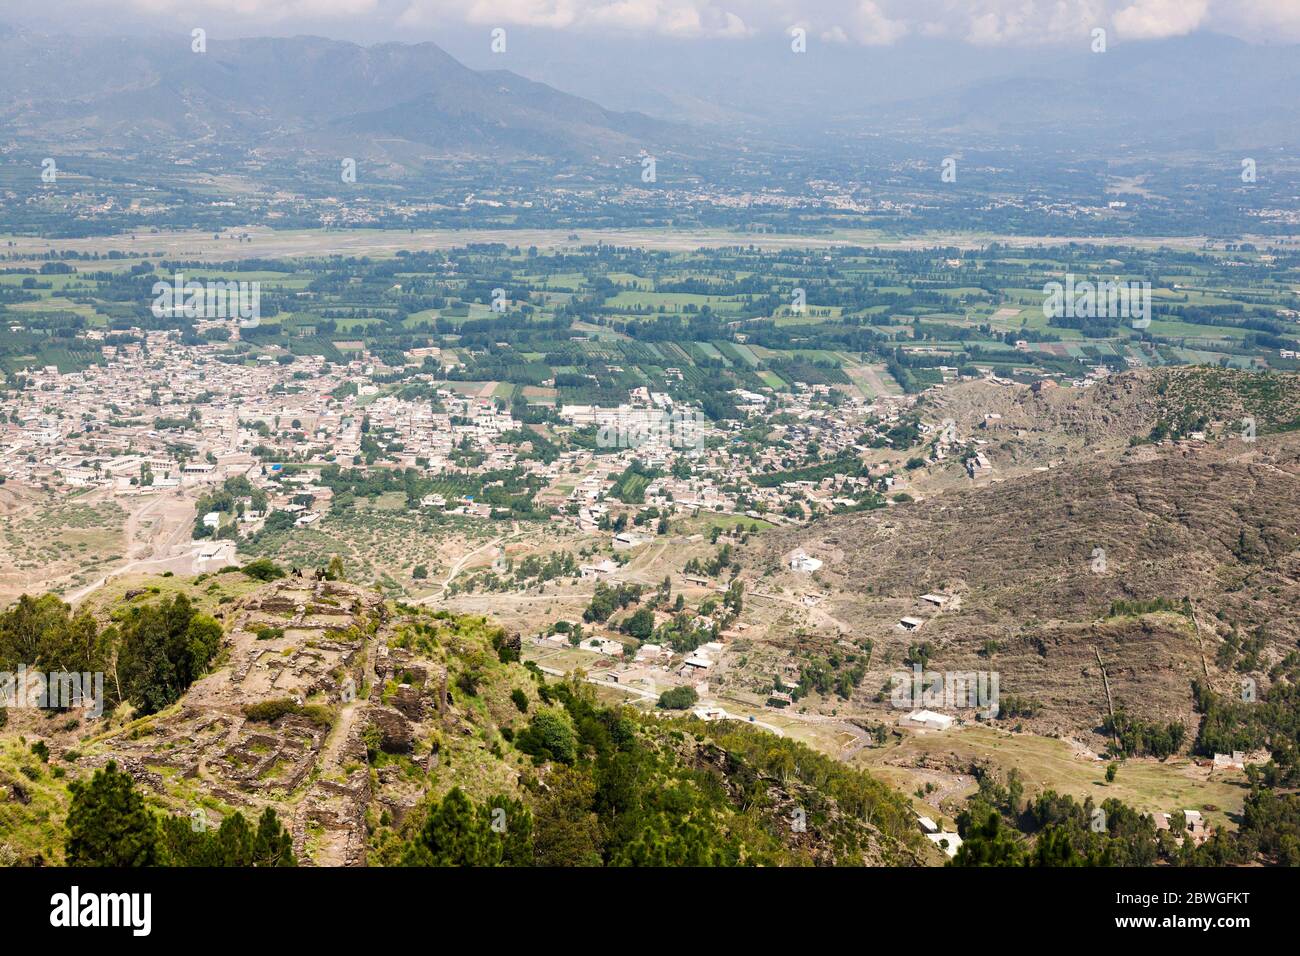 Ancient fort Raja-Gera, Raja-Geera, on hidden hilltop, and view of Swat valley, Swat, Khyber Pakhtunkhwa Province, Pakistan, South Asia, Asia Stock Photo